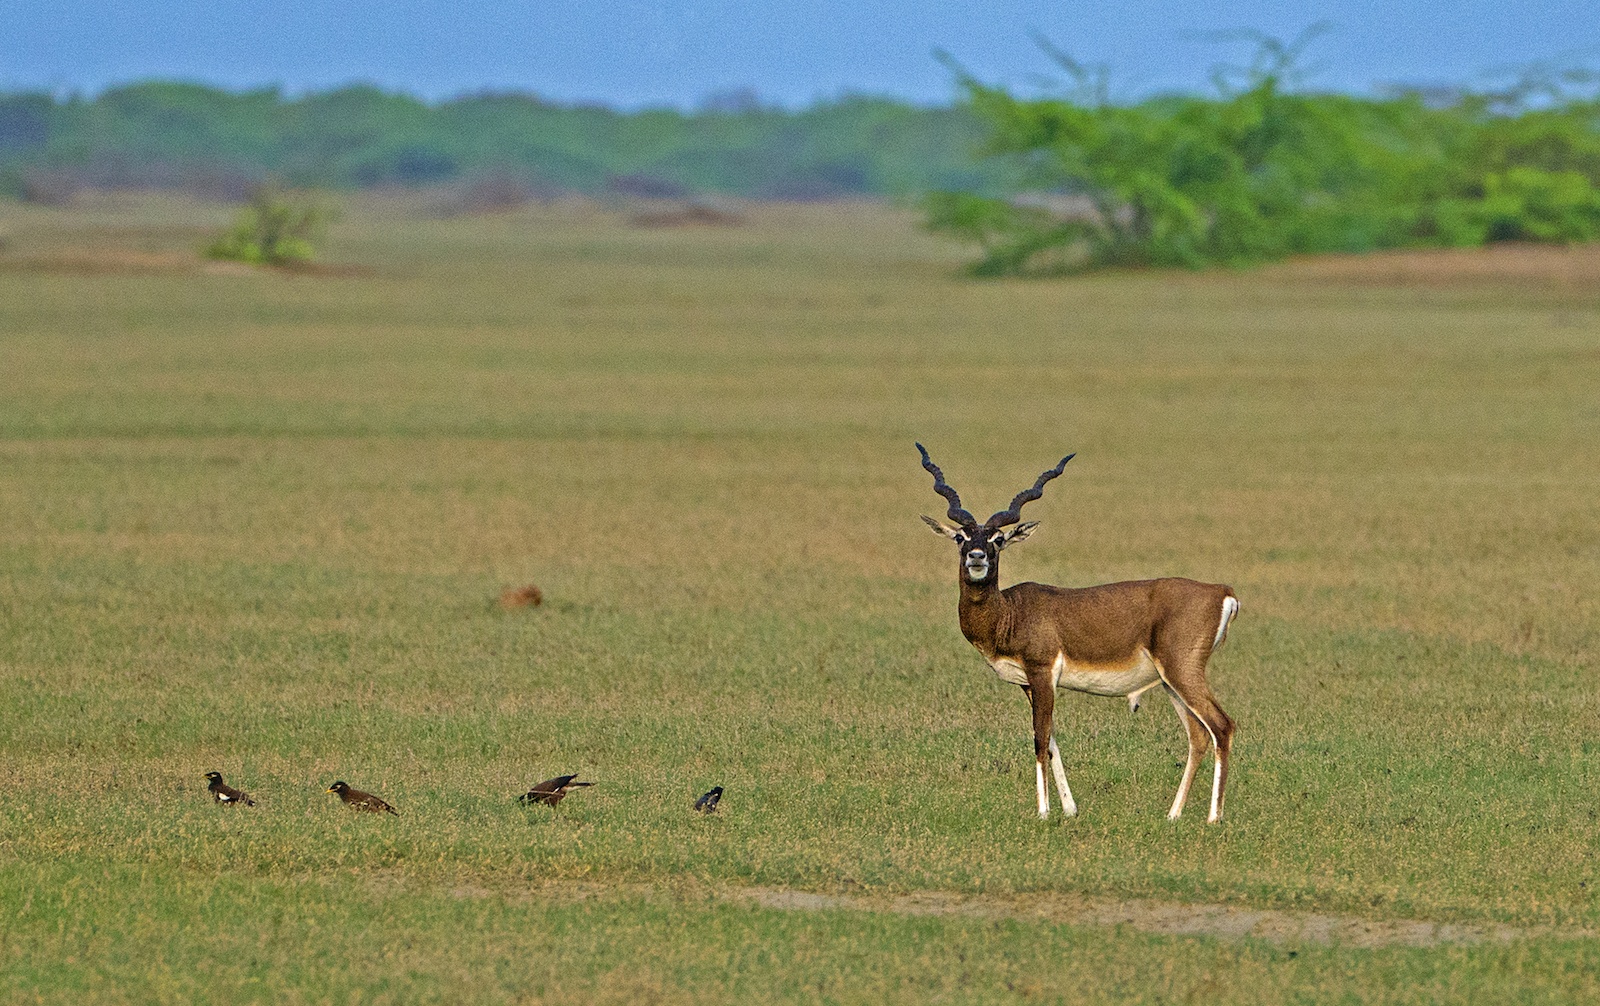 Male blackbuck have distinctive long, spiral, ridged horns. They are known to defend their territory and allow only female blackbuck to enter for mating. 